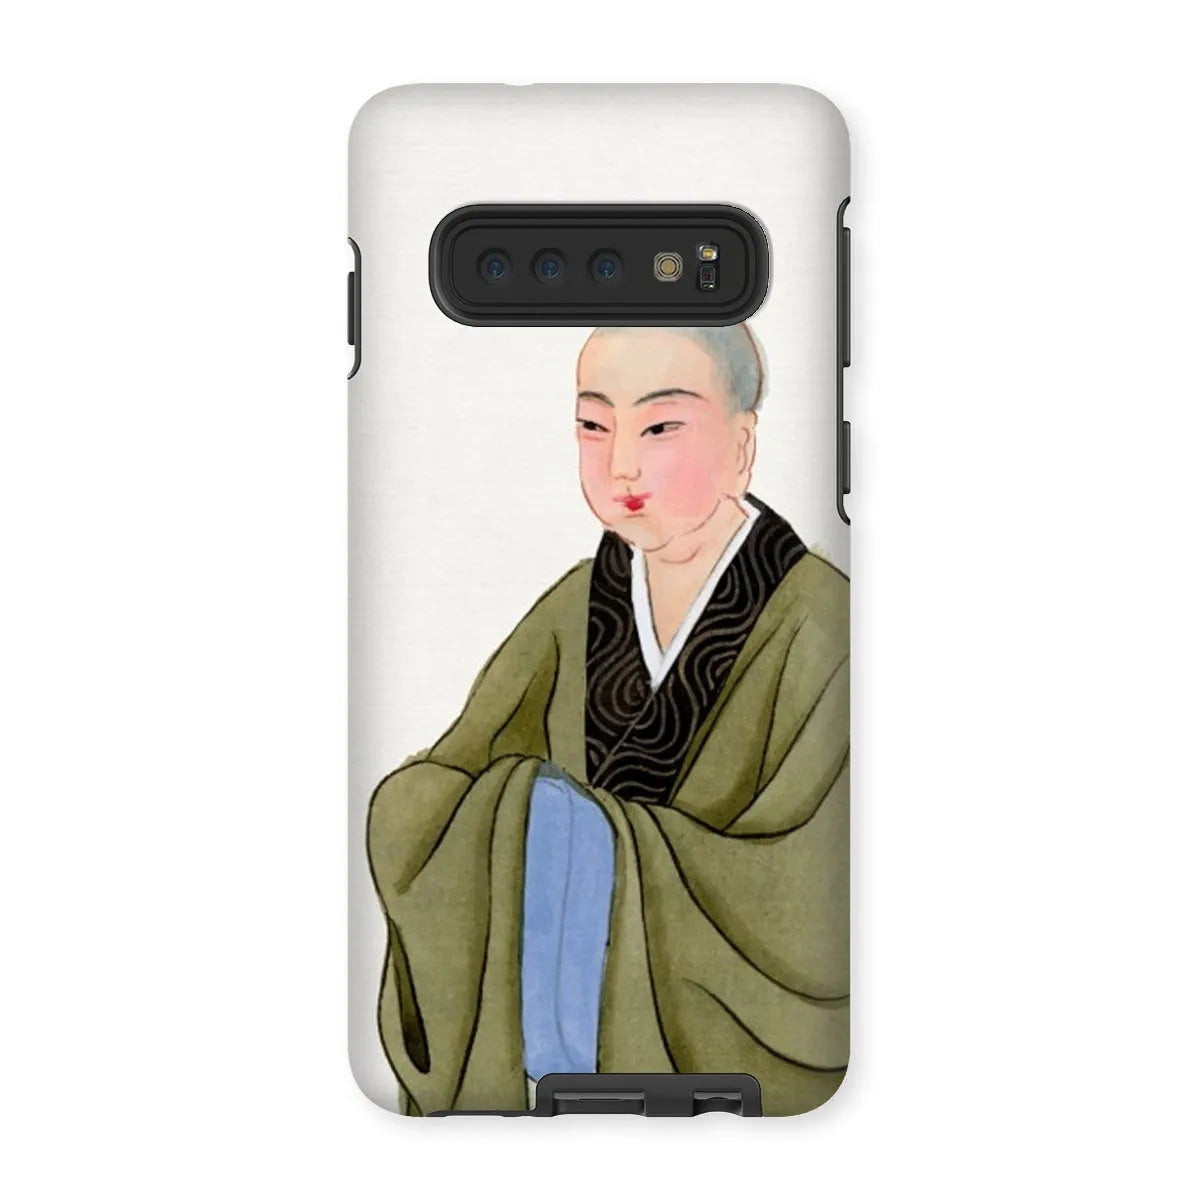 Buddhist Monk - Manchu Chinese Aesthetic Art Phone Case - Samsung Galaxy S10 / Matte - Mobile Phone Cases - Aesthetic